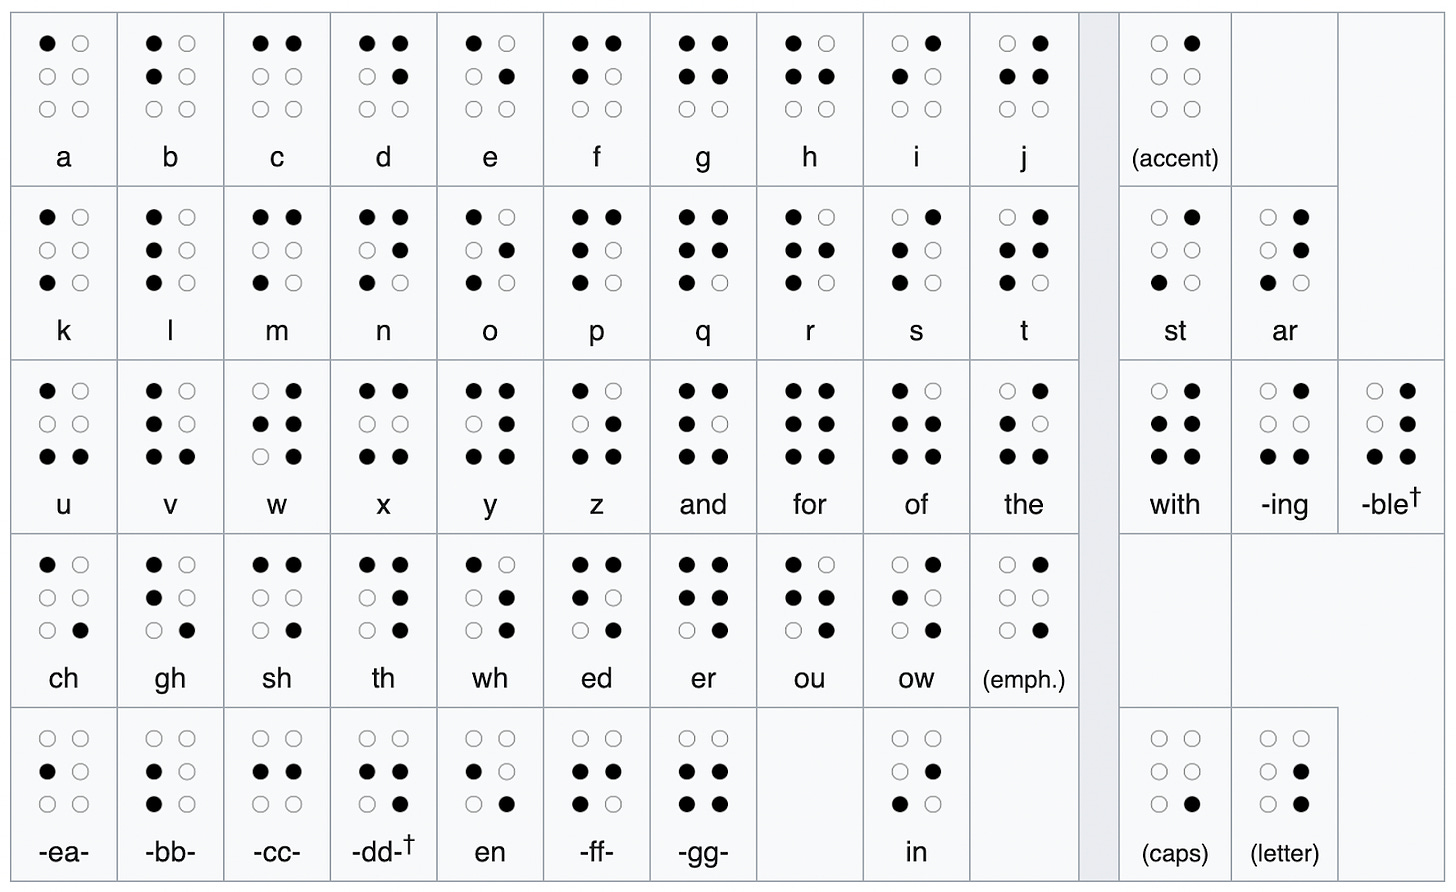 The English Braille alphabet, including digraphs.